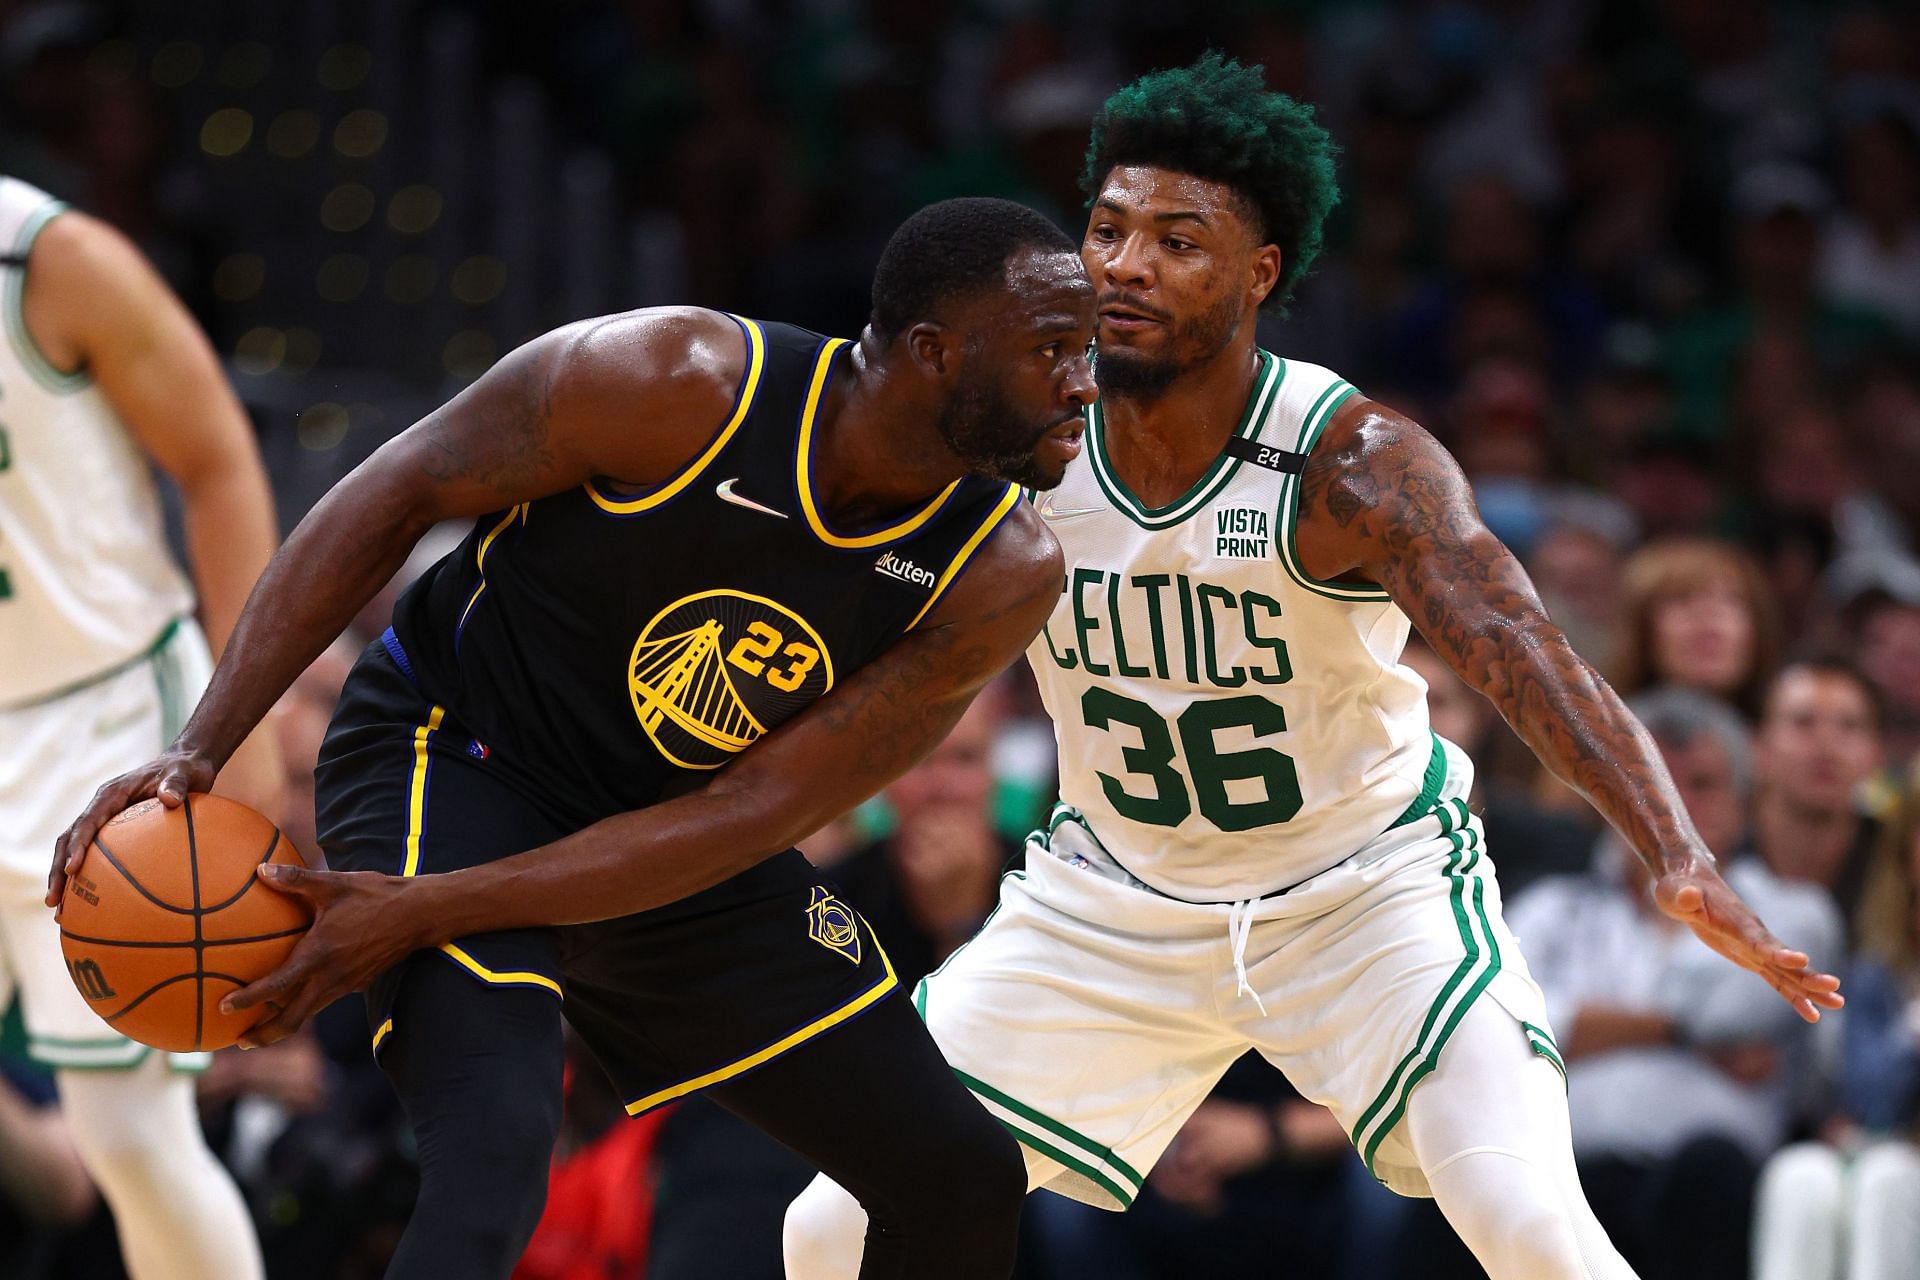 Draymond Green of the Golden State Warriors and Marcus Smart of the Boston Celtics